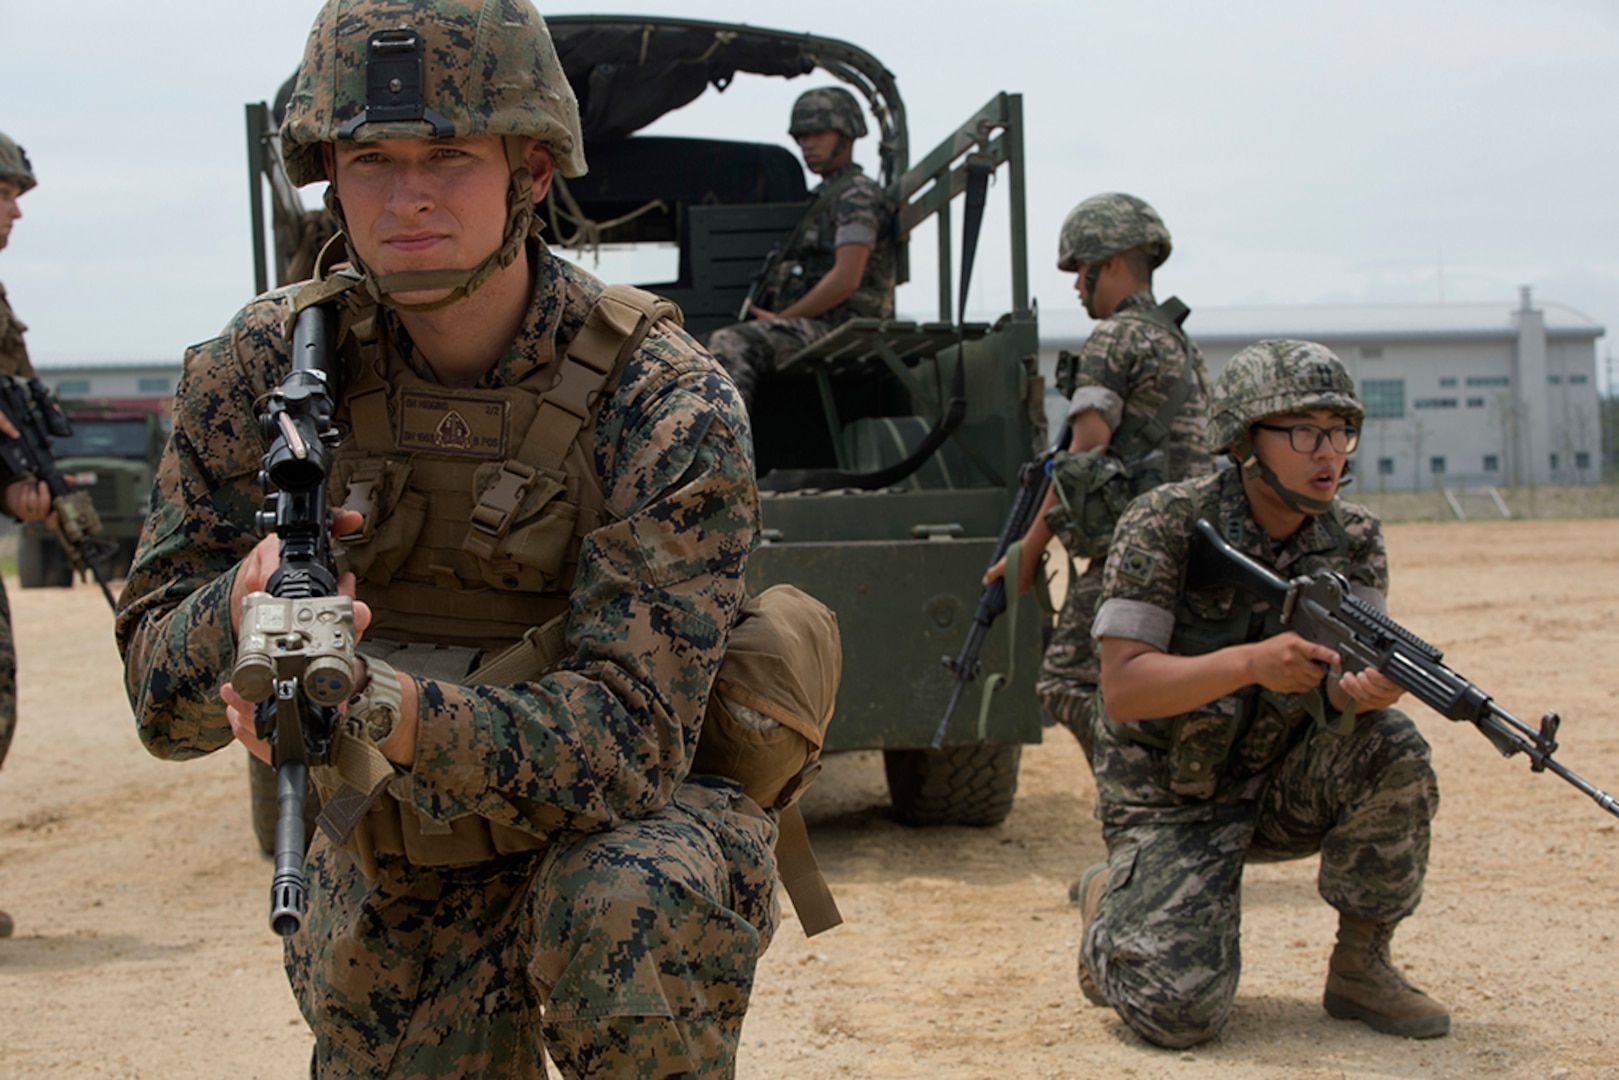 Cpl. Beau M. Higgins posts security beside a Republic of Korea Marine during convoy escort training July 11, 2016 during Korean Marine Exchange Program 16-11. KMEP offers realistic training leveraging the most advanced tactics and technology to ensure a trained and ready ROK-U.S. combined force. The ROK Marines are with 73rd Battalion, 7th Regiment, 1st Marine Division. Higgins, a Layton, Utah, native, is a cyber network specialist with 2nd Battalion, 2nd Marine Regiment, currently assigned to 4th Marine Regiment, 3rd Marine Division, III Marine Expeditionary Force through the unit deployment program.